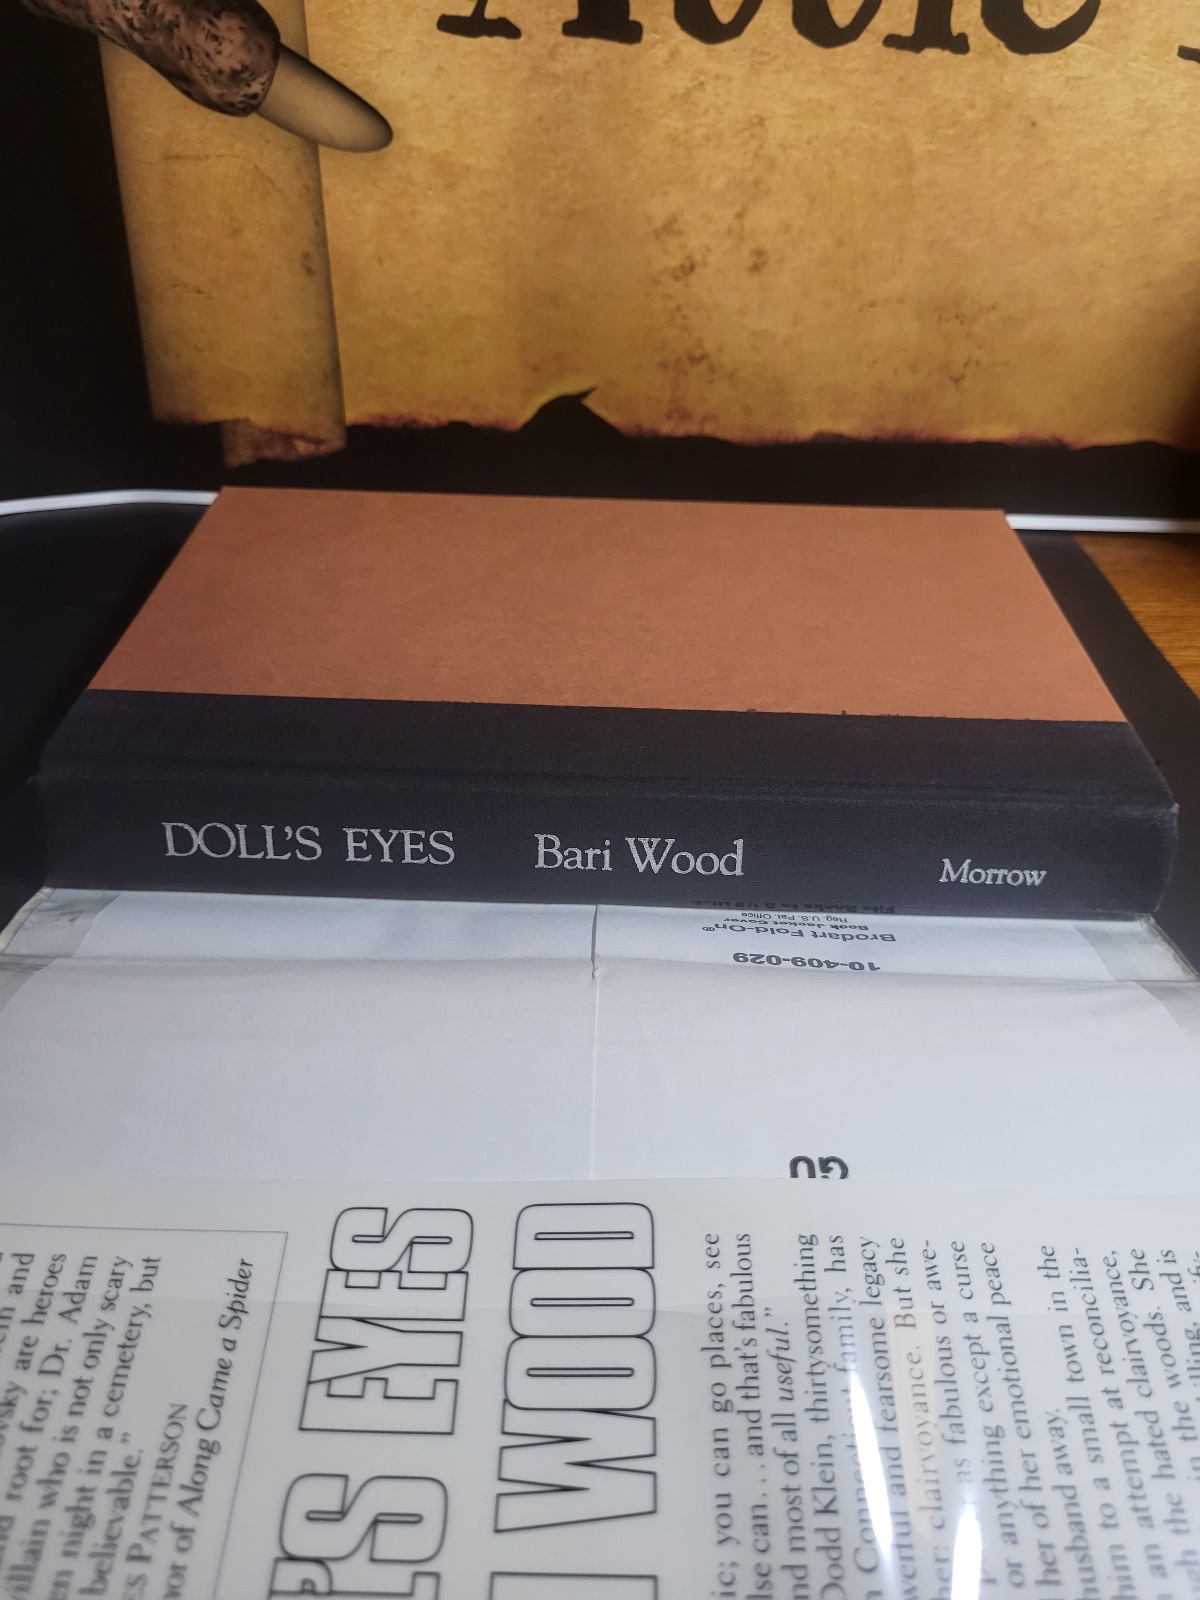 Doll’s Eyes by Bari Wood 1993 First Edition Hardcover Horror